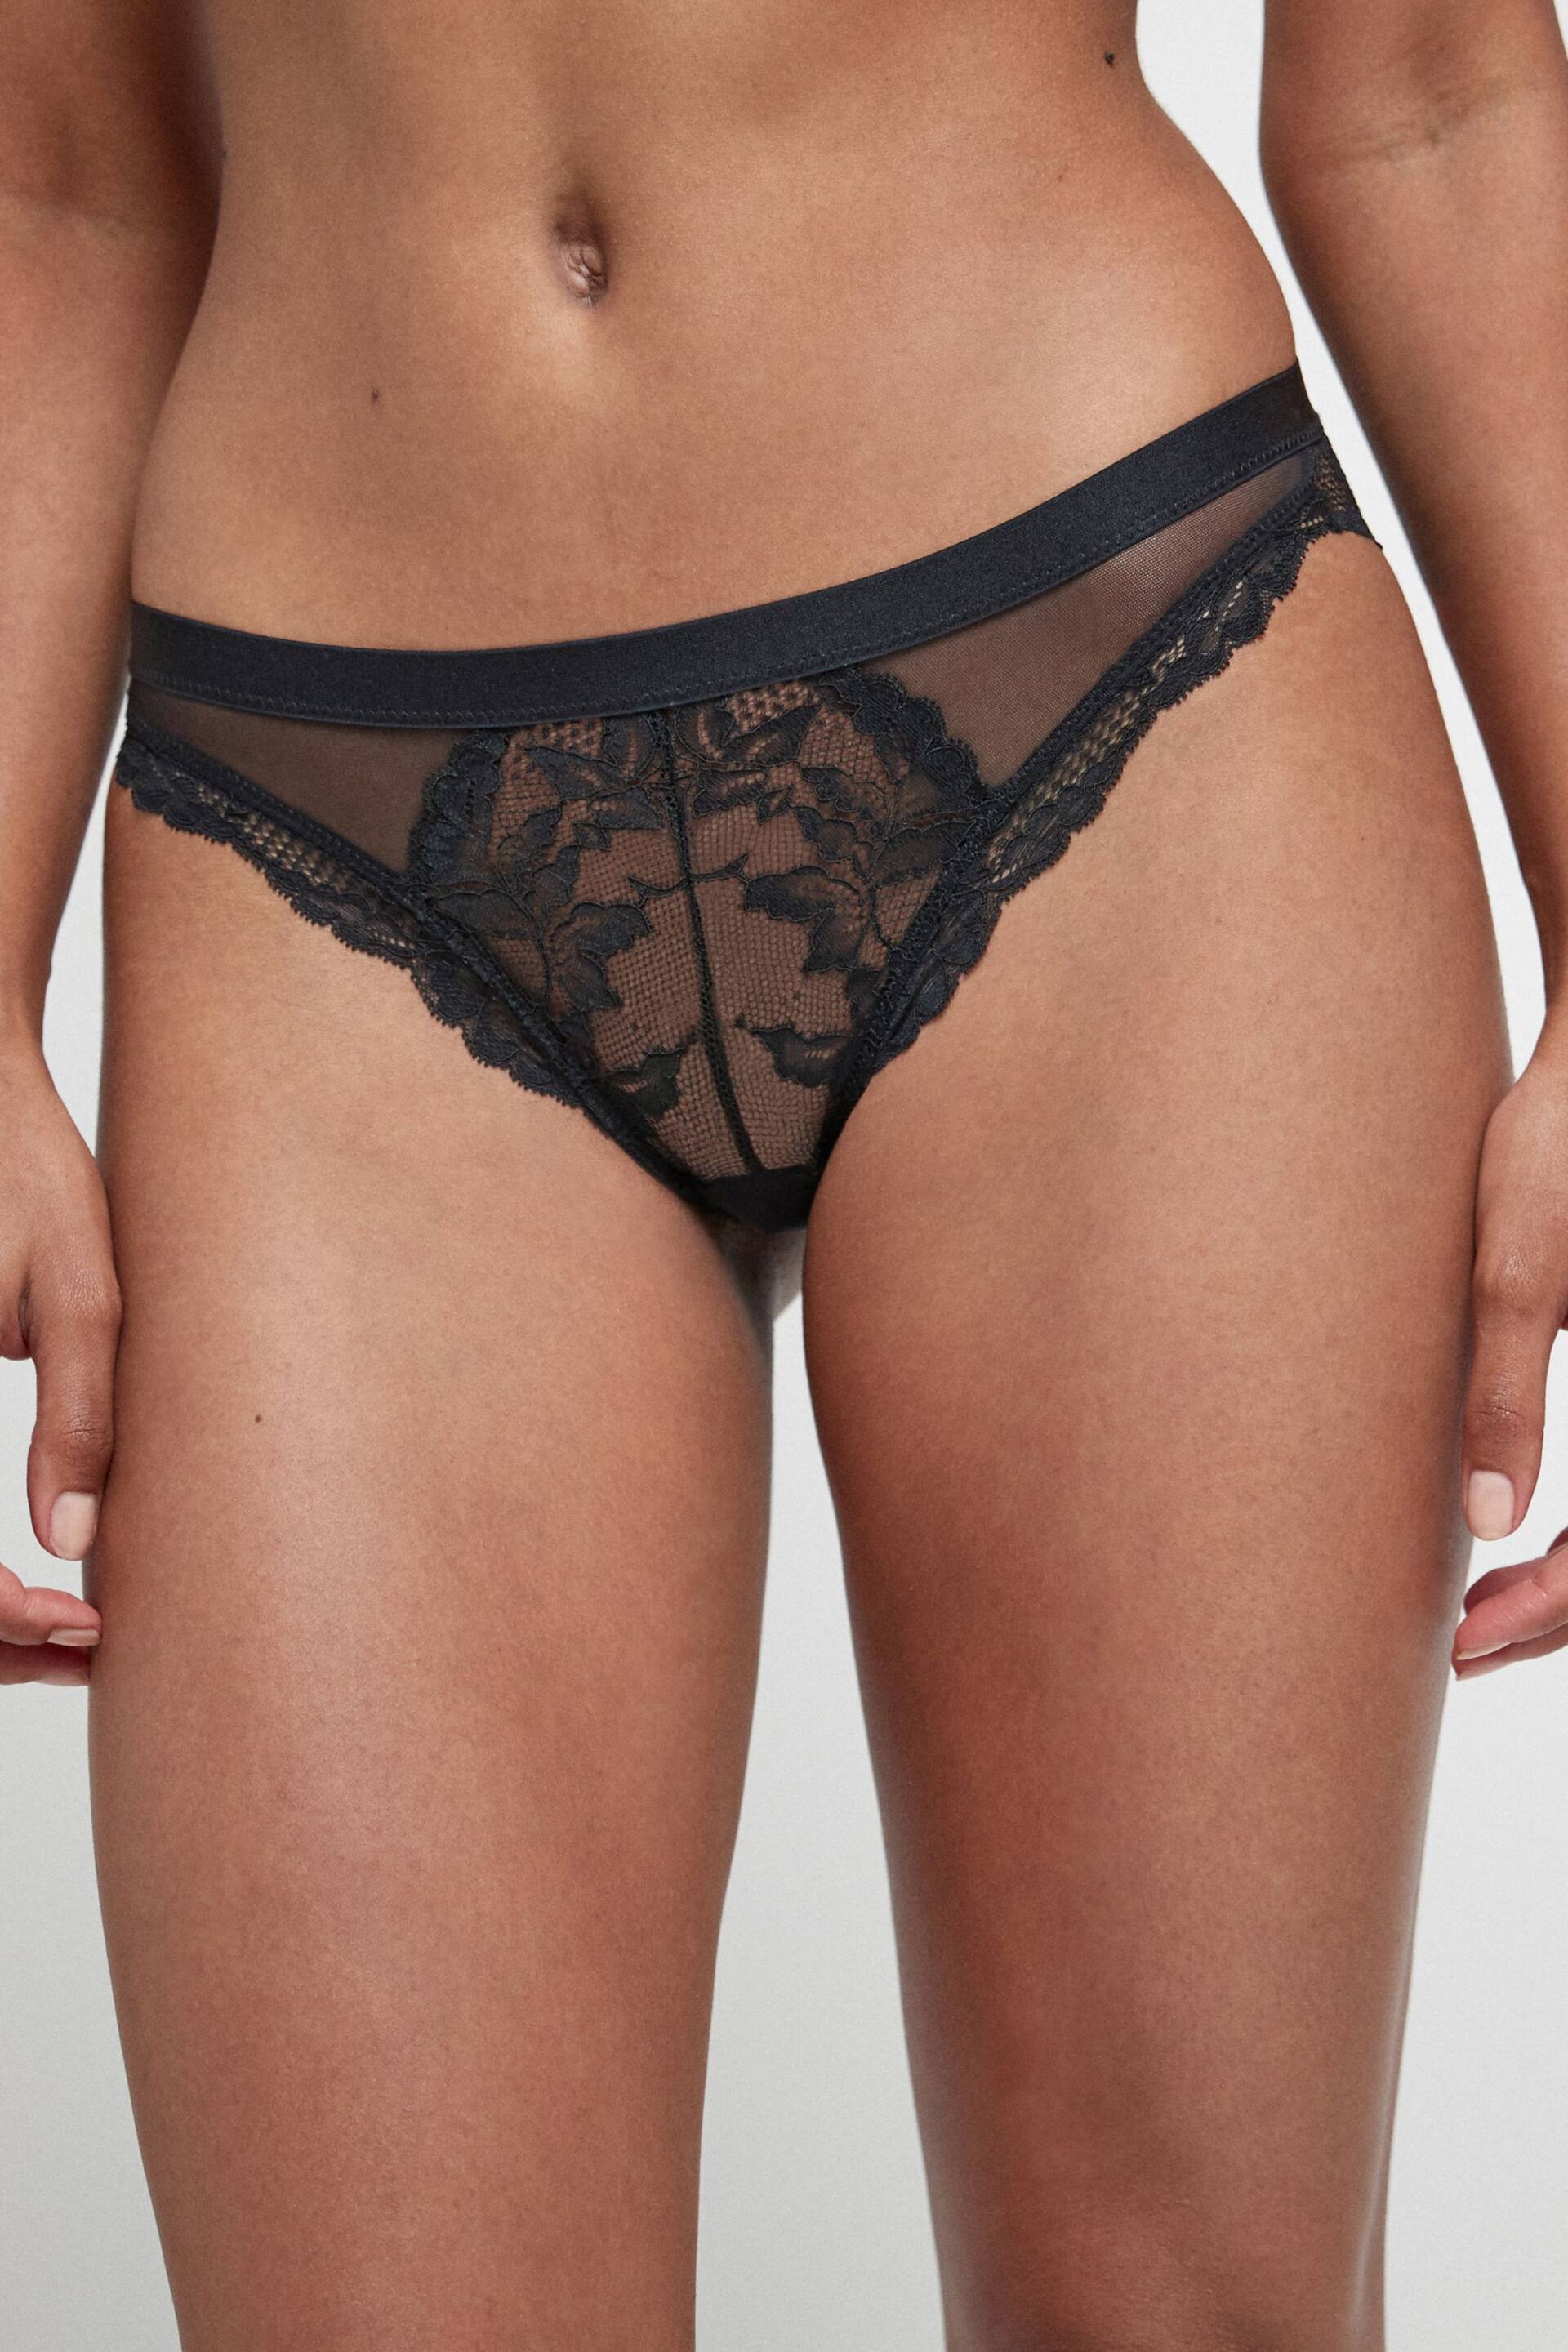 Black/White High Leg Lace Knickers 2 Pack - Image 2 of 7